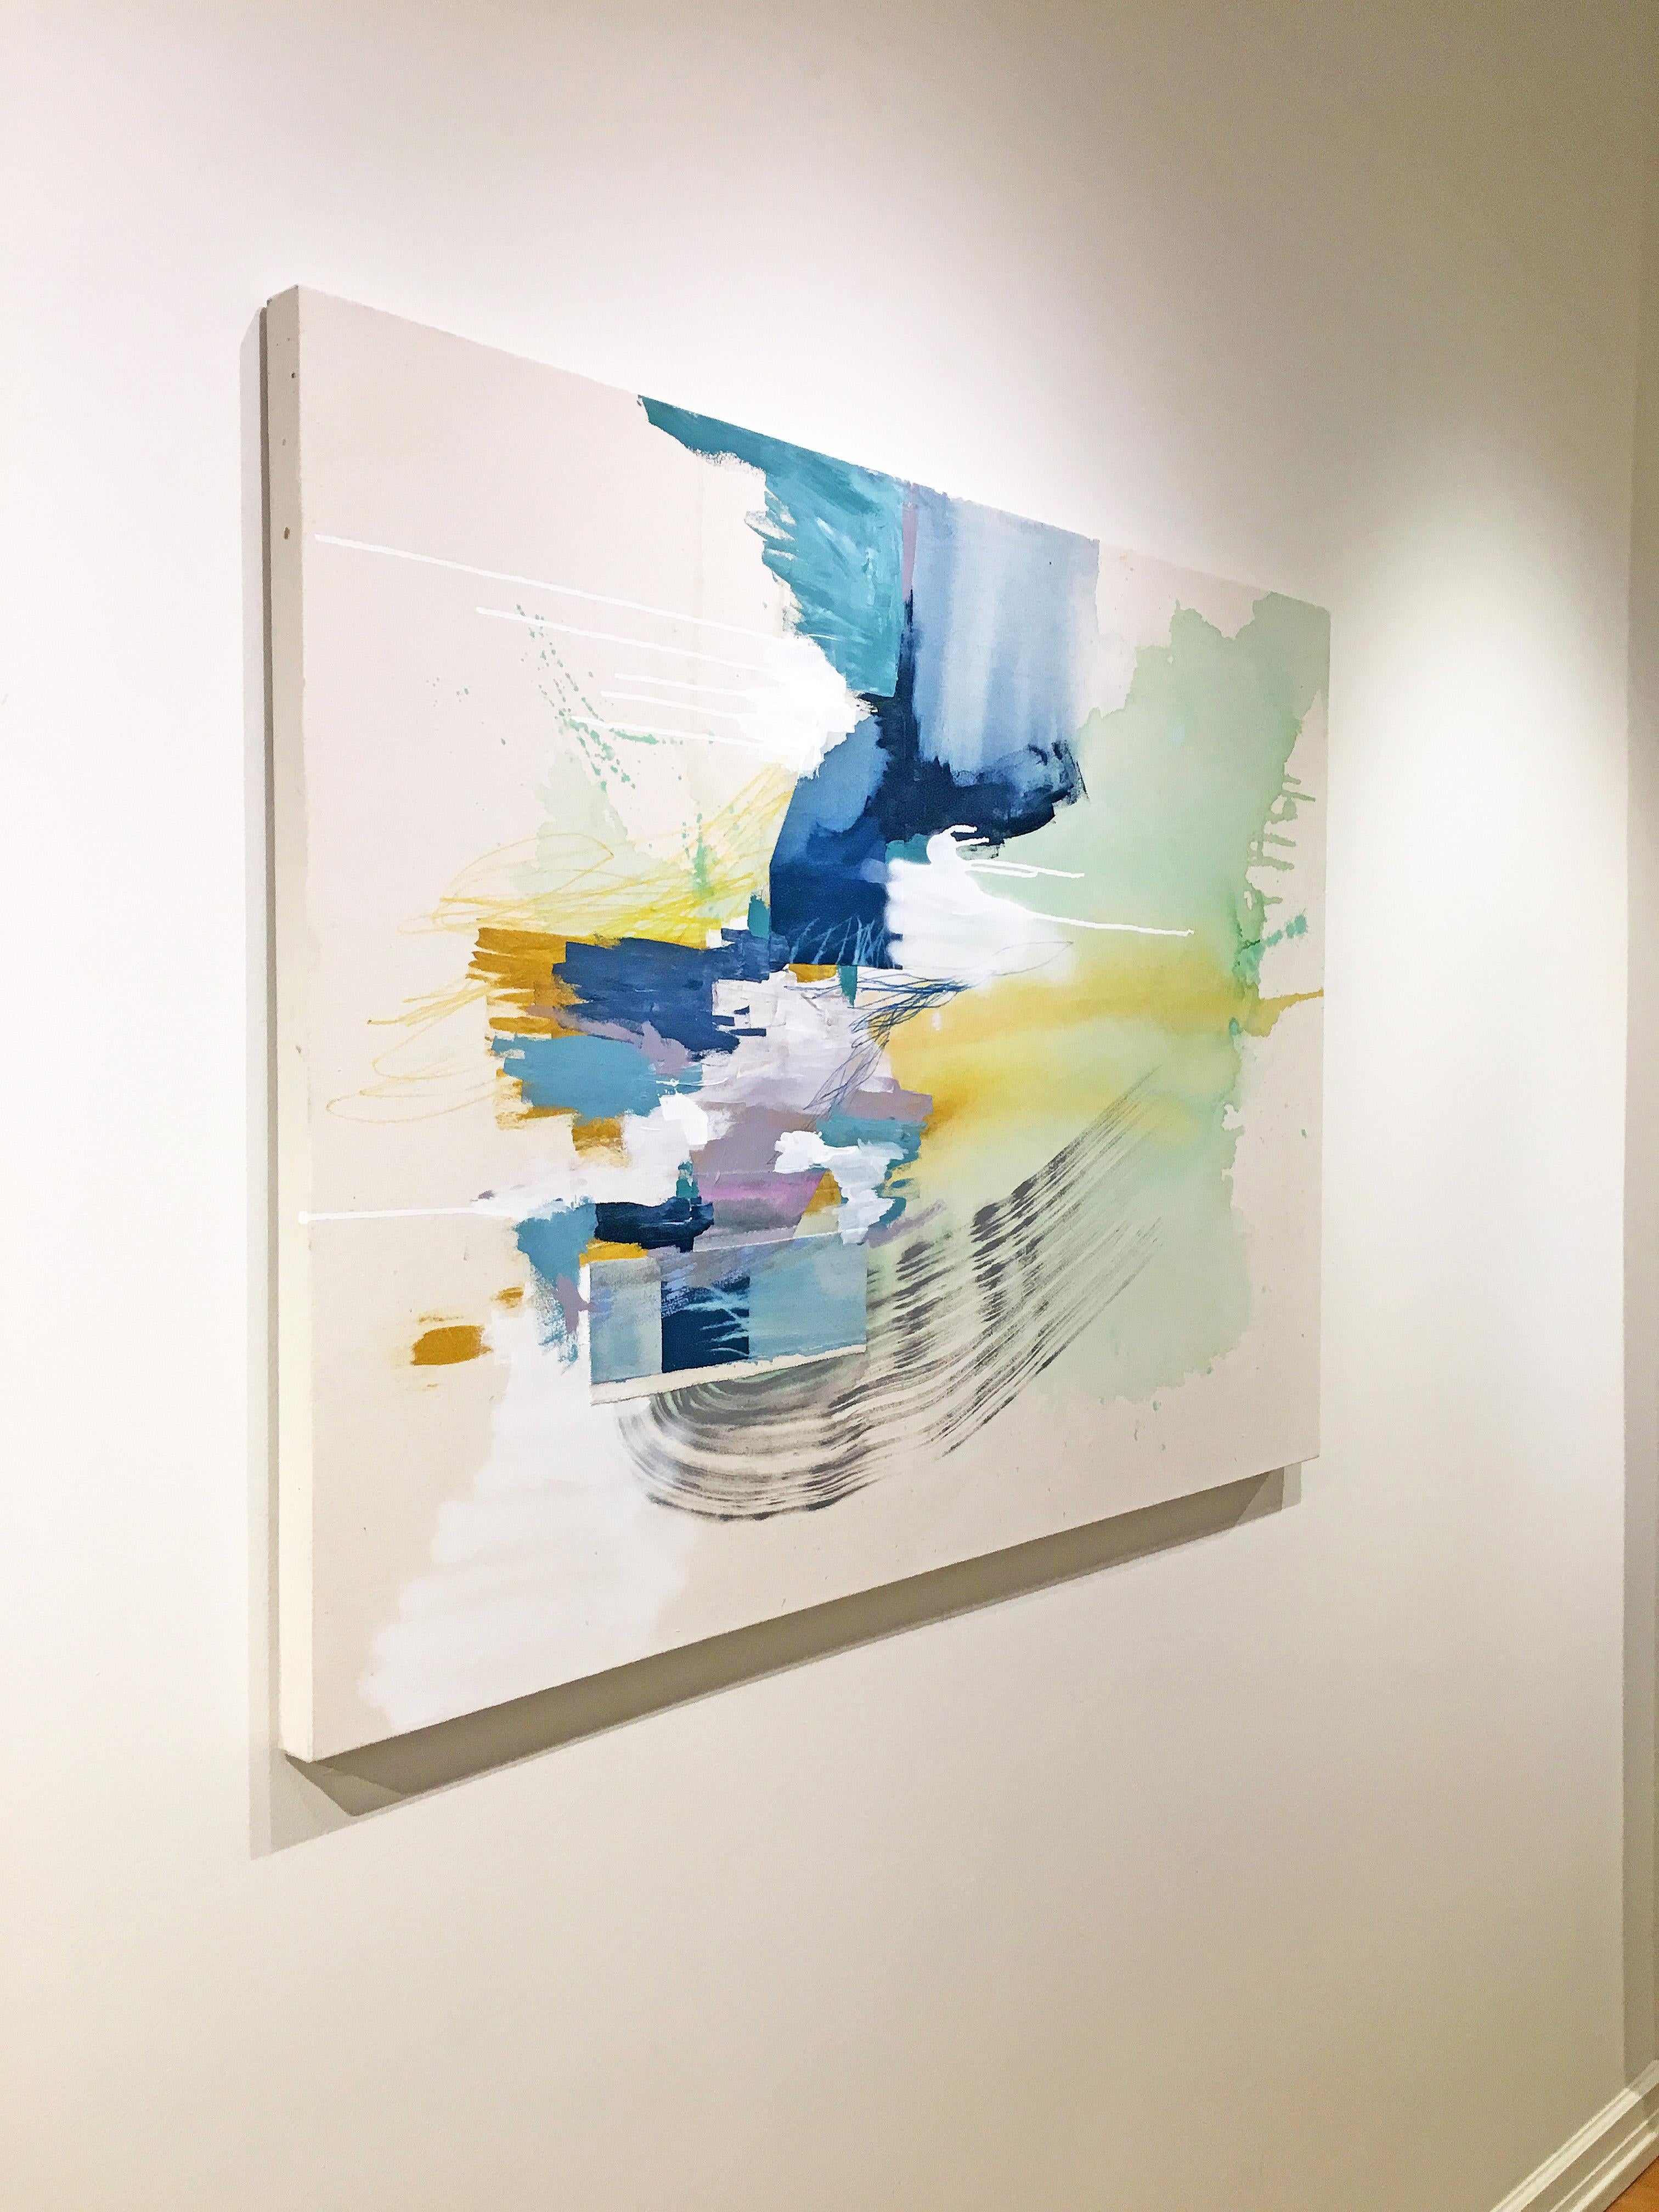 'Missing Memories' 2019 by American artist, Rebecca Stern. Acrylic, ink, spray paint, and canvas collaged on canvas, 36 x 48 in. Stern's artwork explores themes of motivation, control, chance, change, and balance. Gestural marks within the work